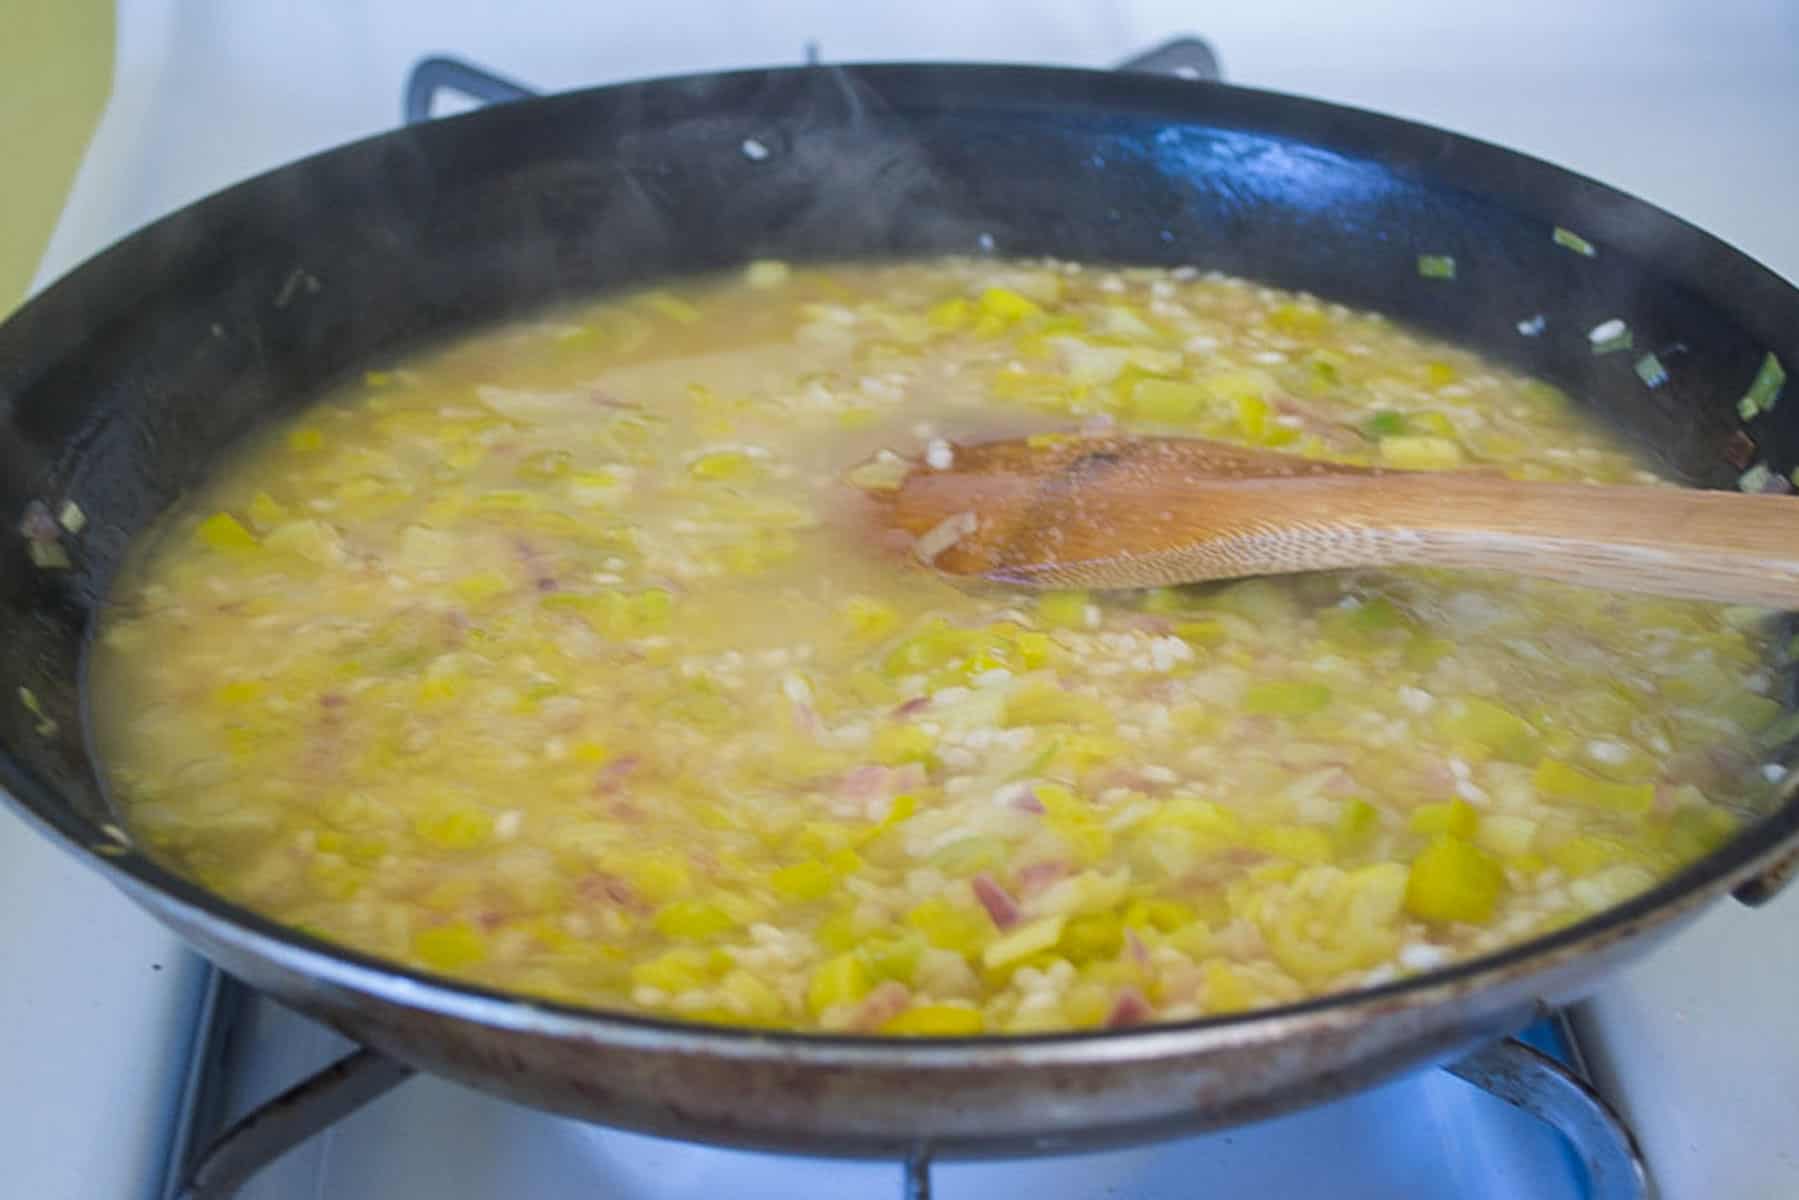 Add vegetable stock to risotto and simmer until stock begins to reduce.